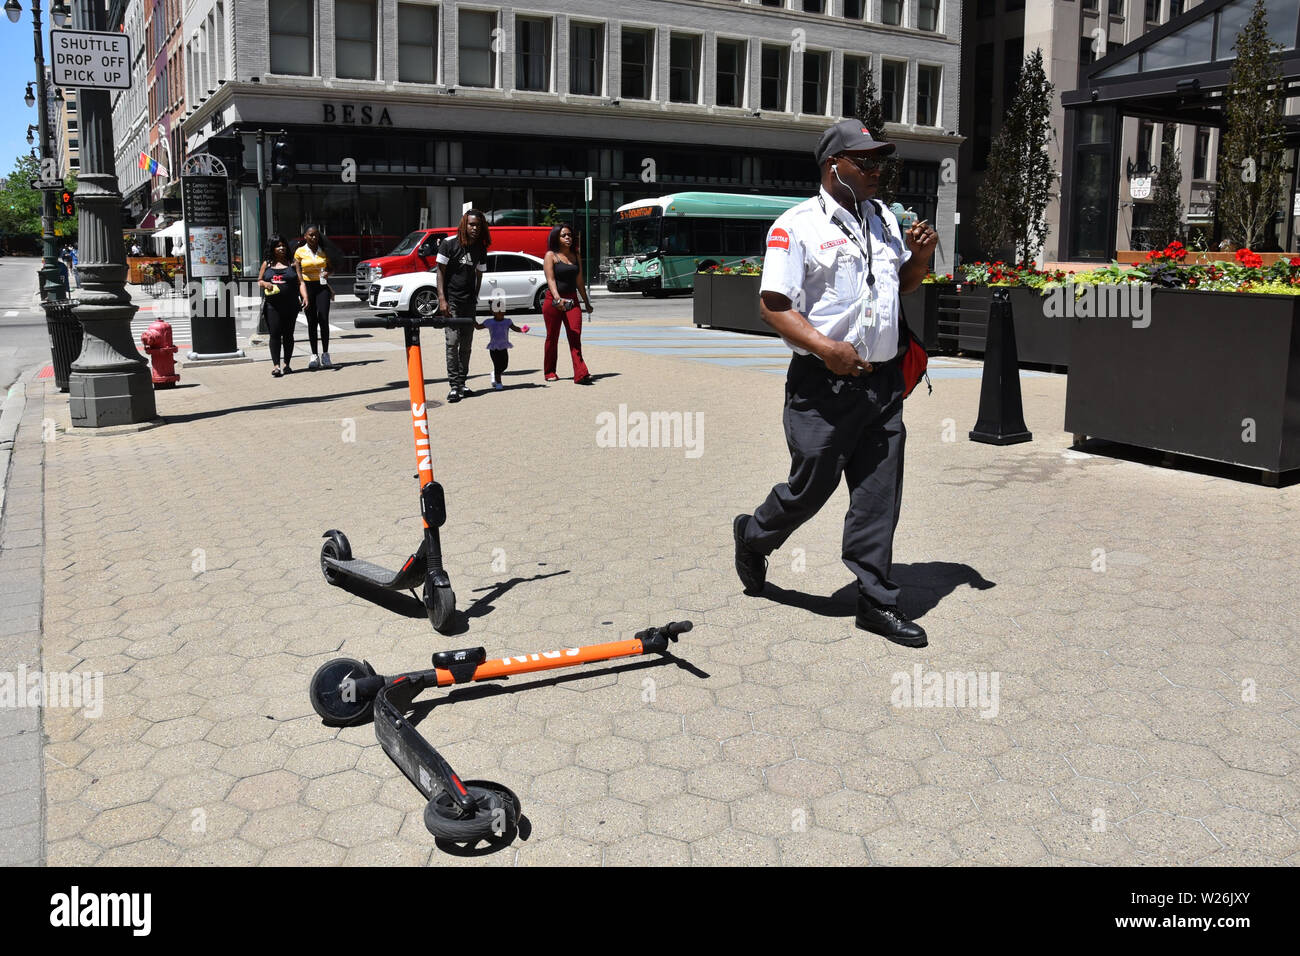 DETROIT, MI / USA - JUNE 30, 2019:  People walk past Spin scooters on a sidewalk in downtown Detroit. Stock Photo